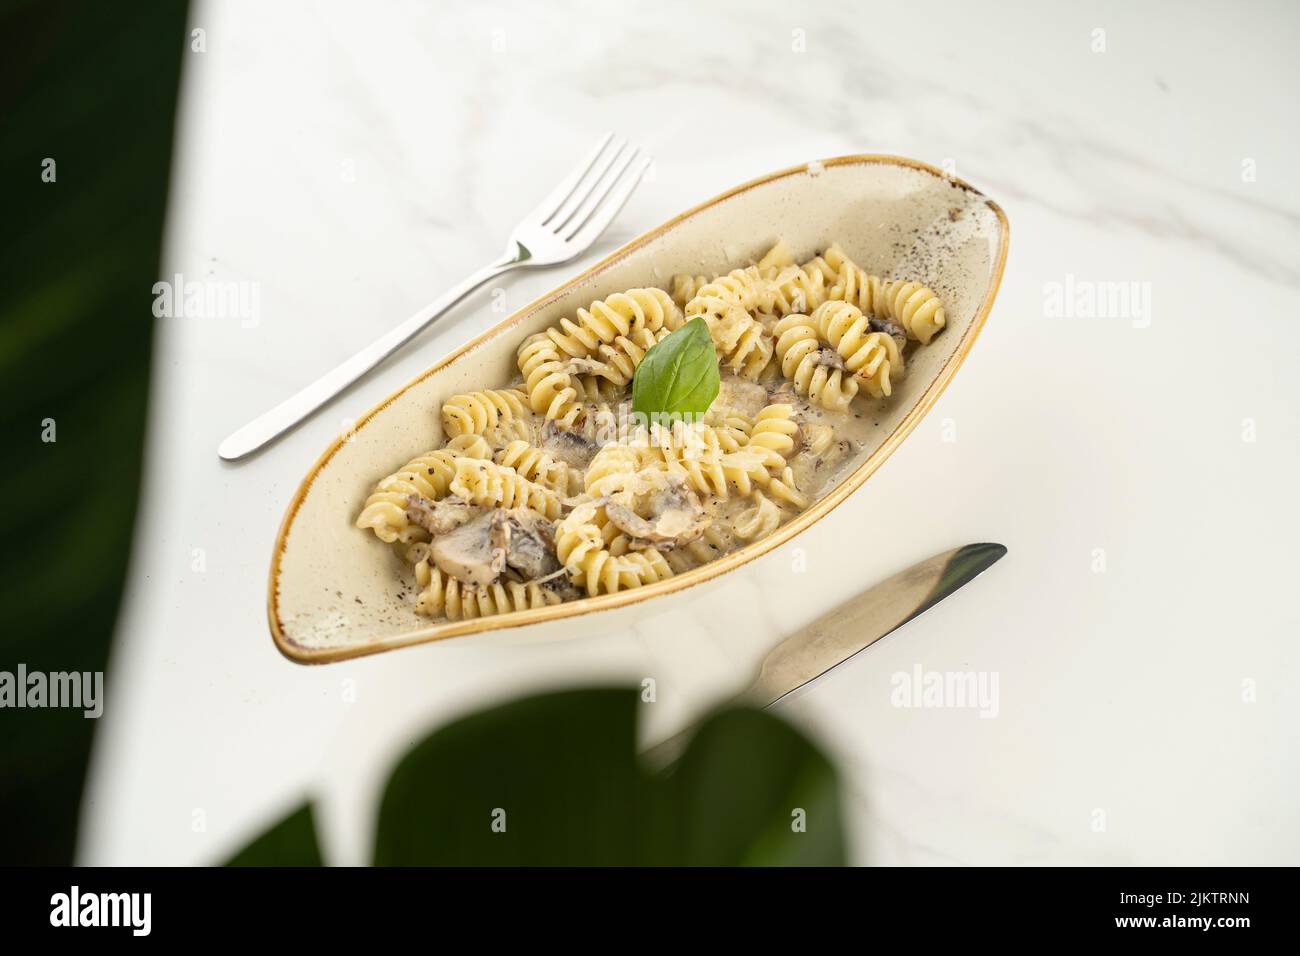 A creamy pasta with mushrooms and basil in an oblong bowl on a marble table Stock Photo